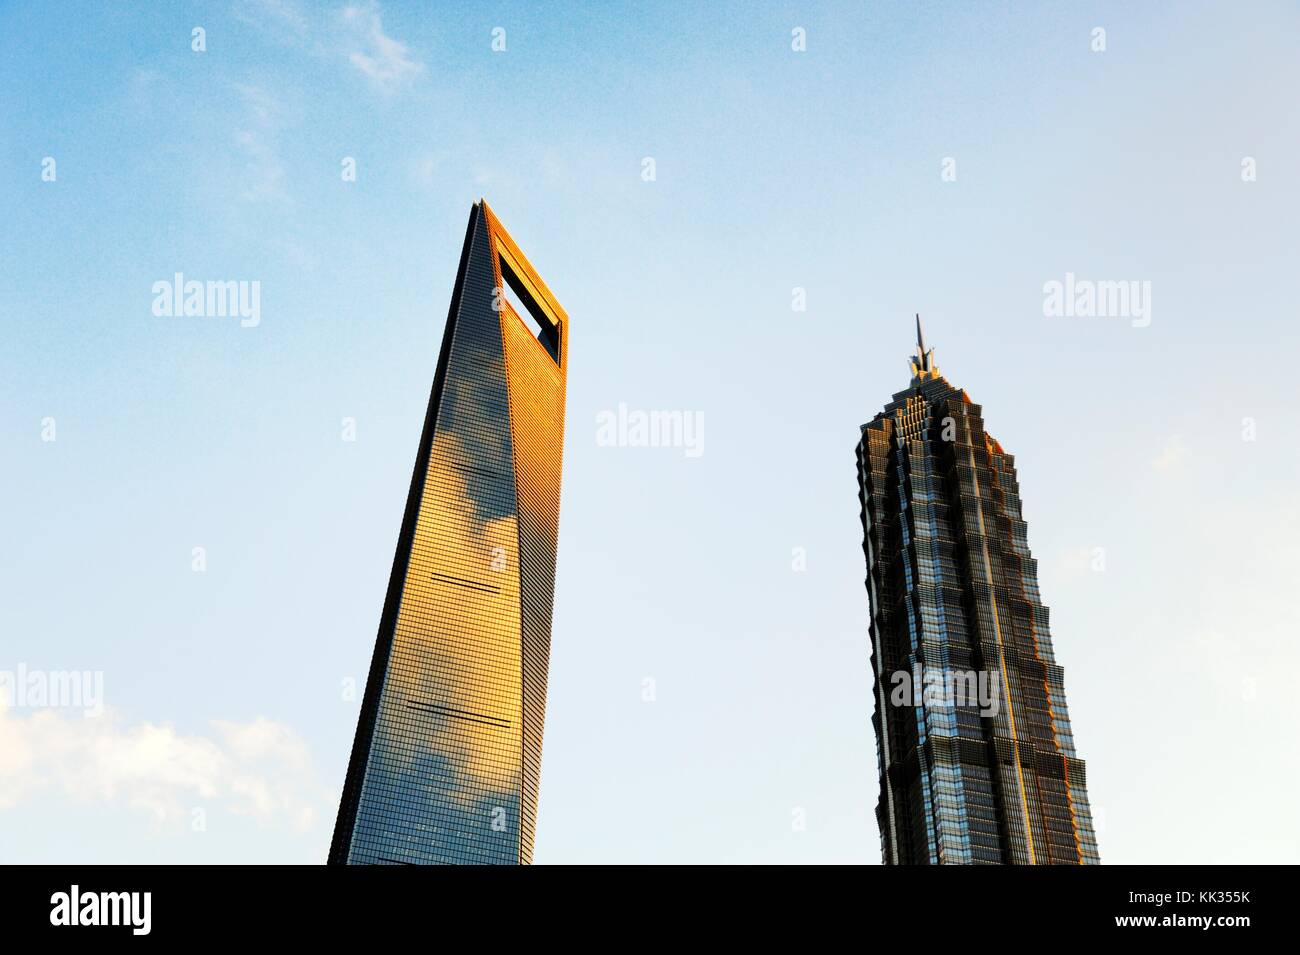 Shanghai, China. Shanghai World Financial Center (left, world's second tallest) and the Jin Mao Tower. Pudong District, Shanghai Stock Photo